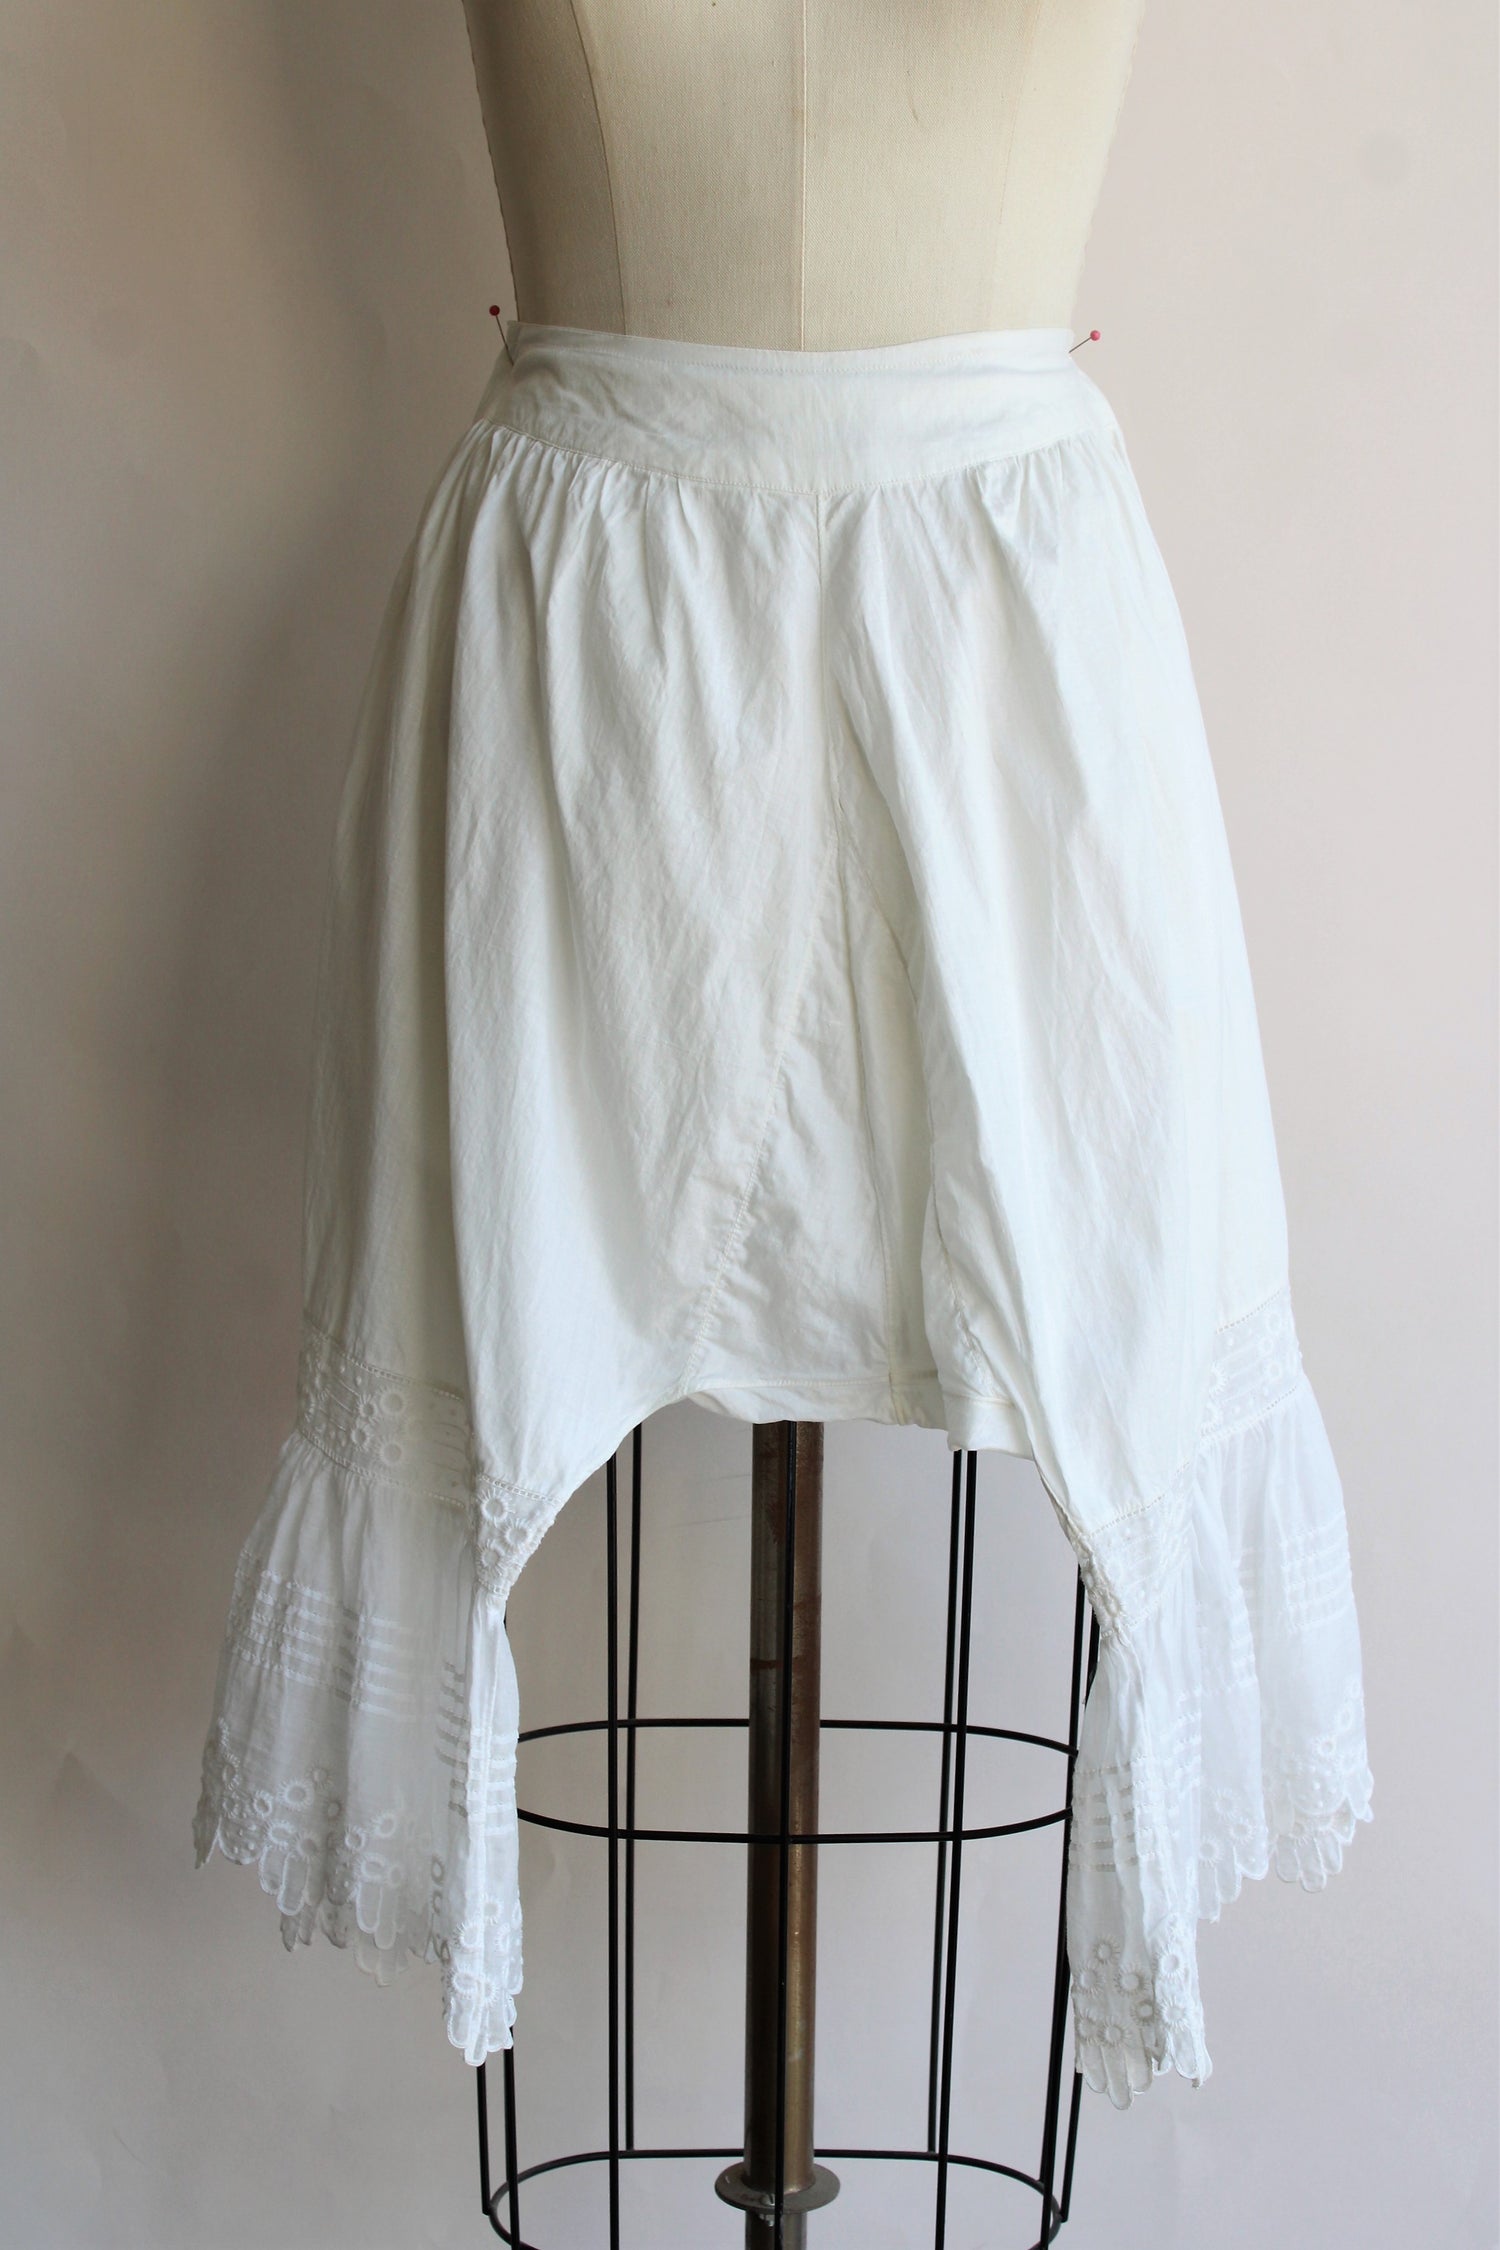 Antique Victorian White Cotton Bloomers